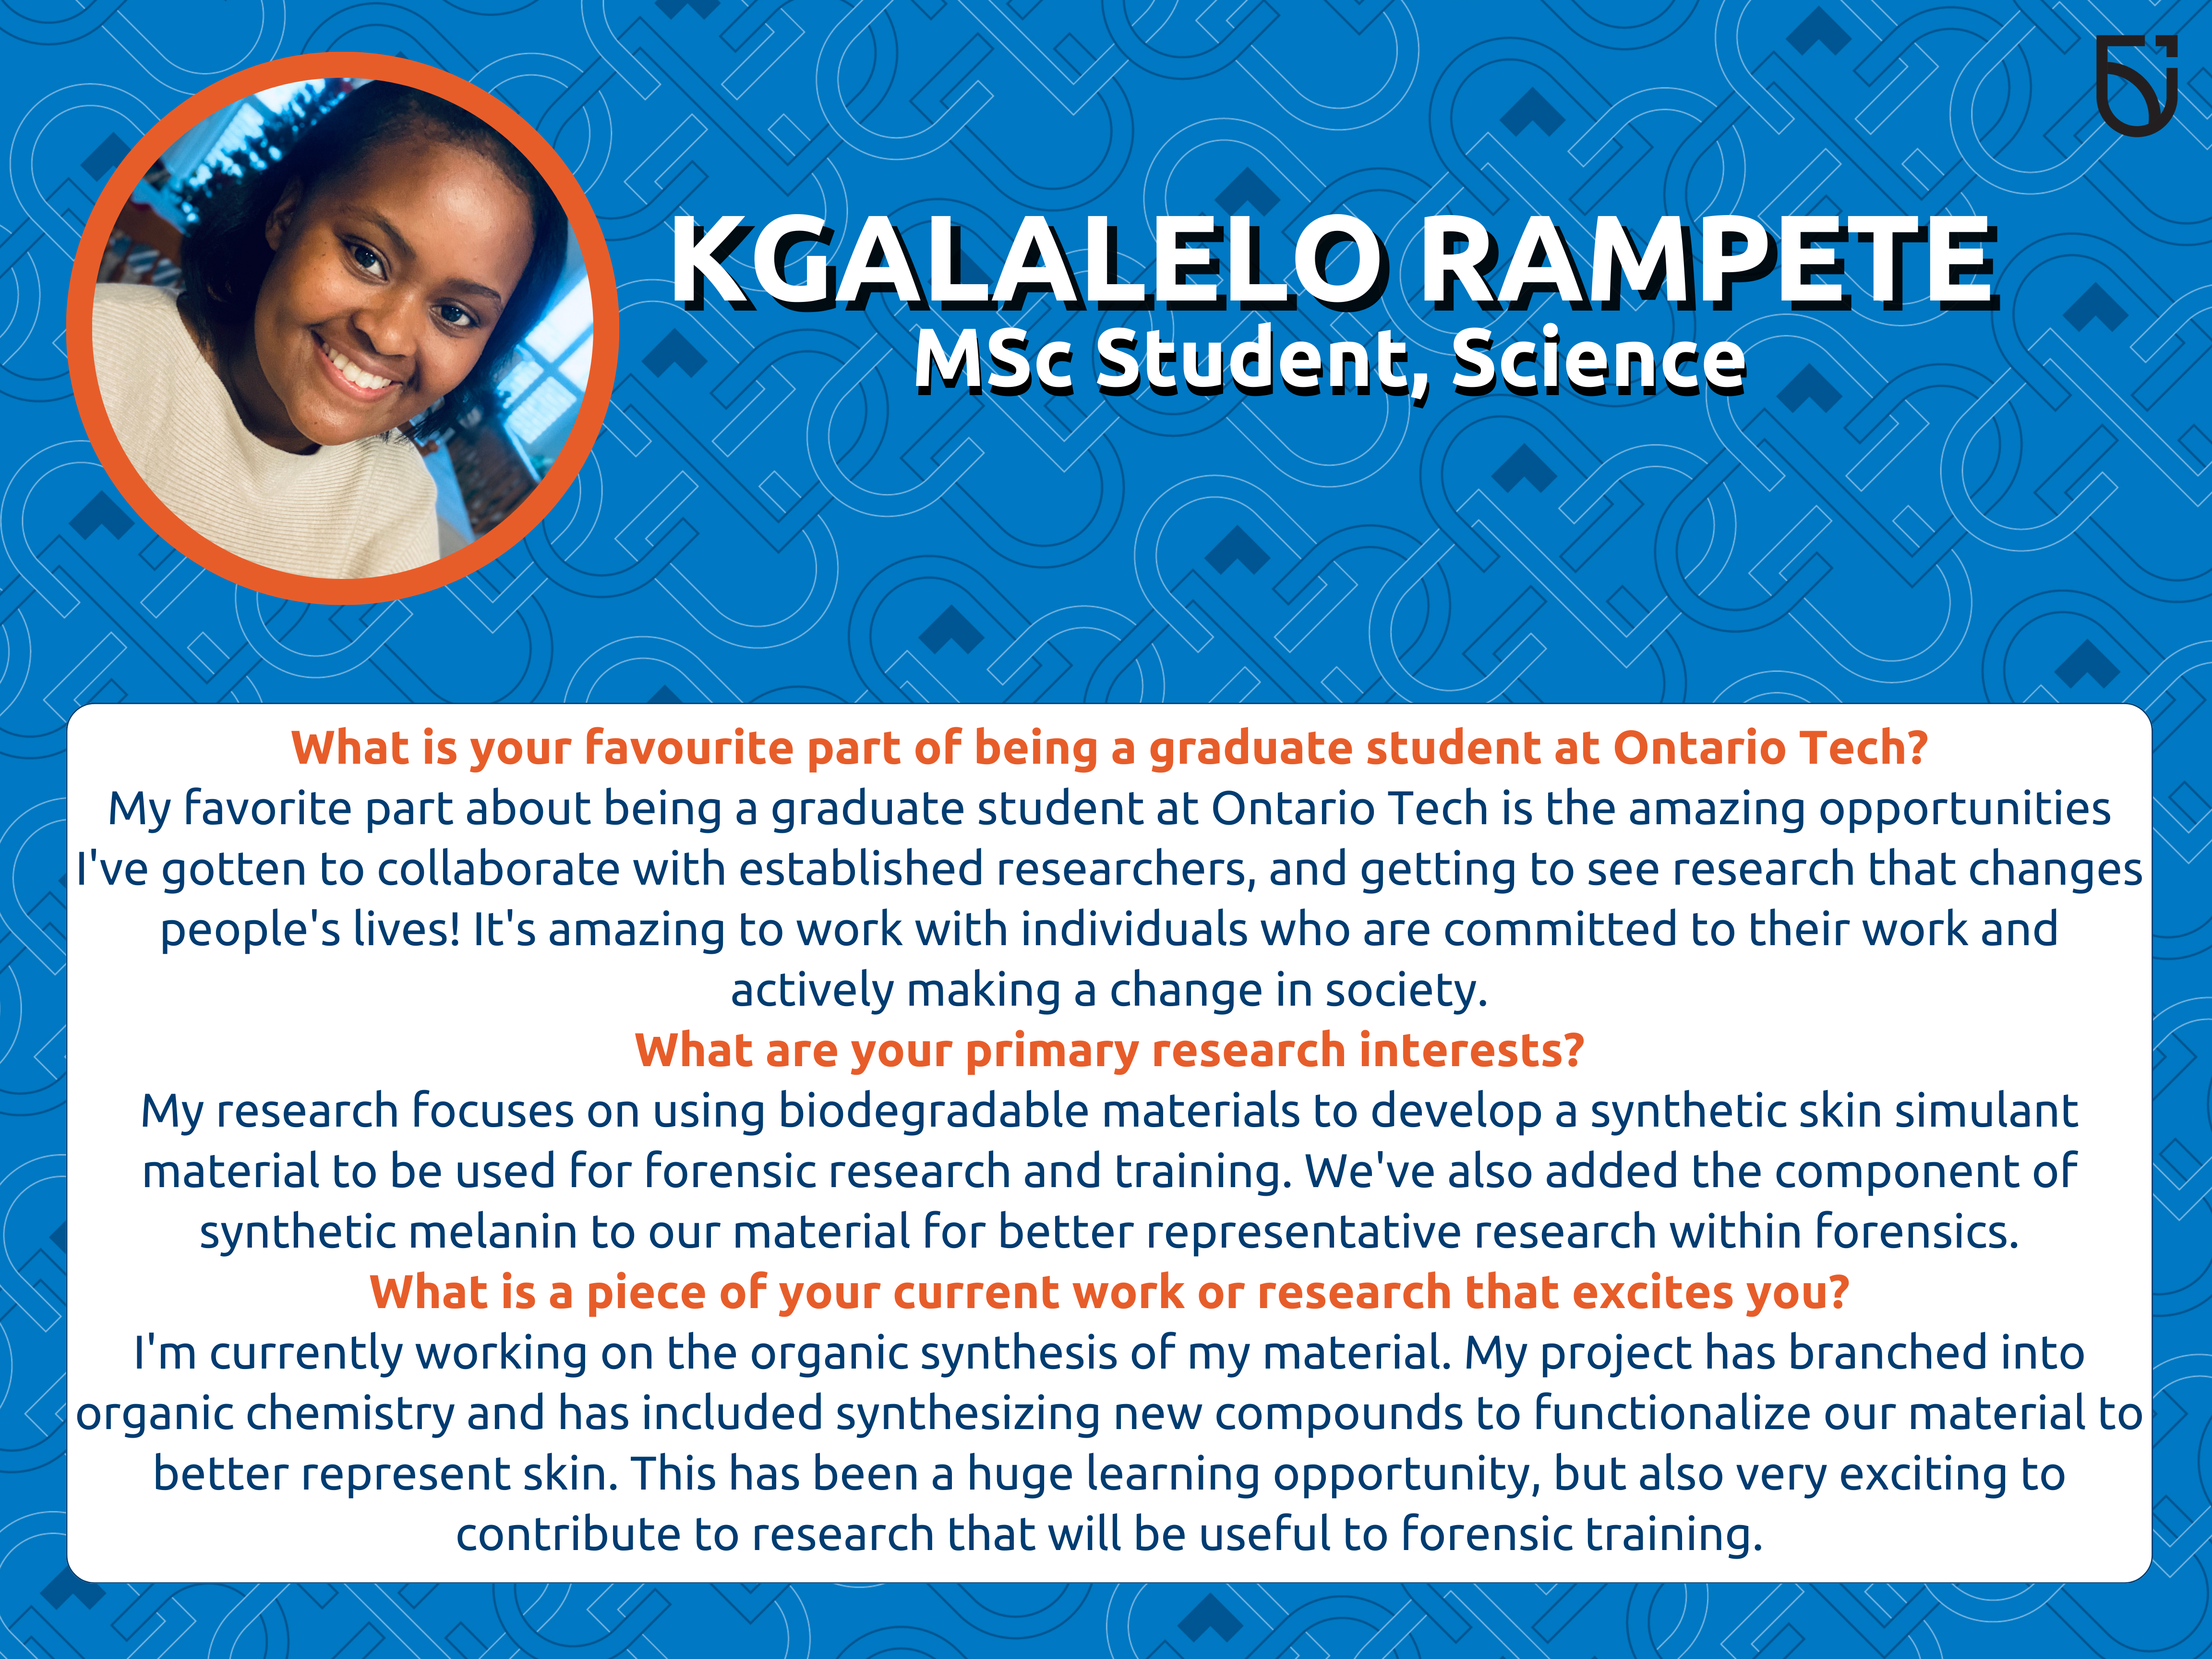 This photo is a Women’s Wednesday feature of Kgalalelo Rampete, an MSc student in the Faculty of Science